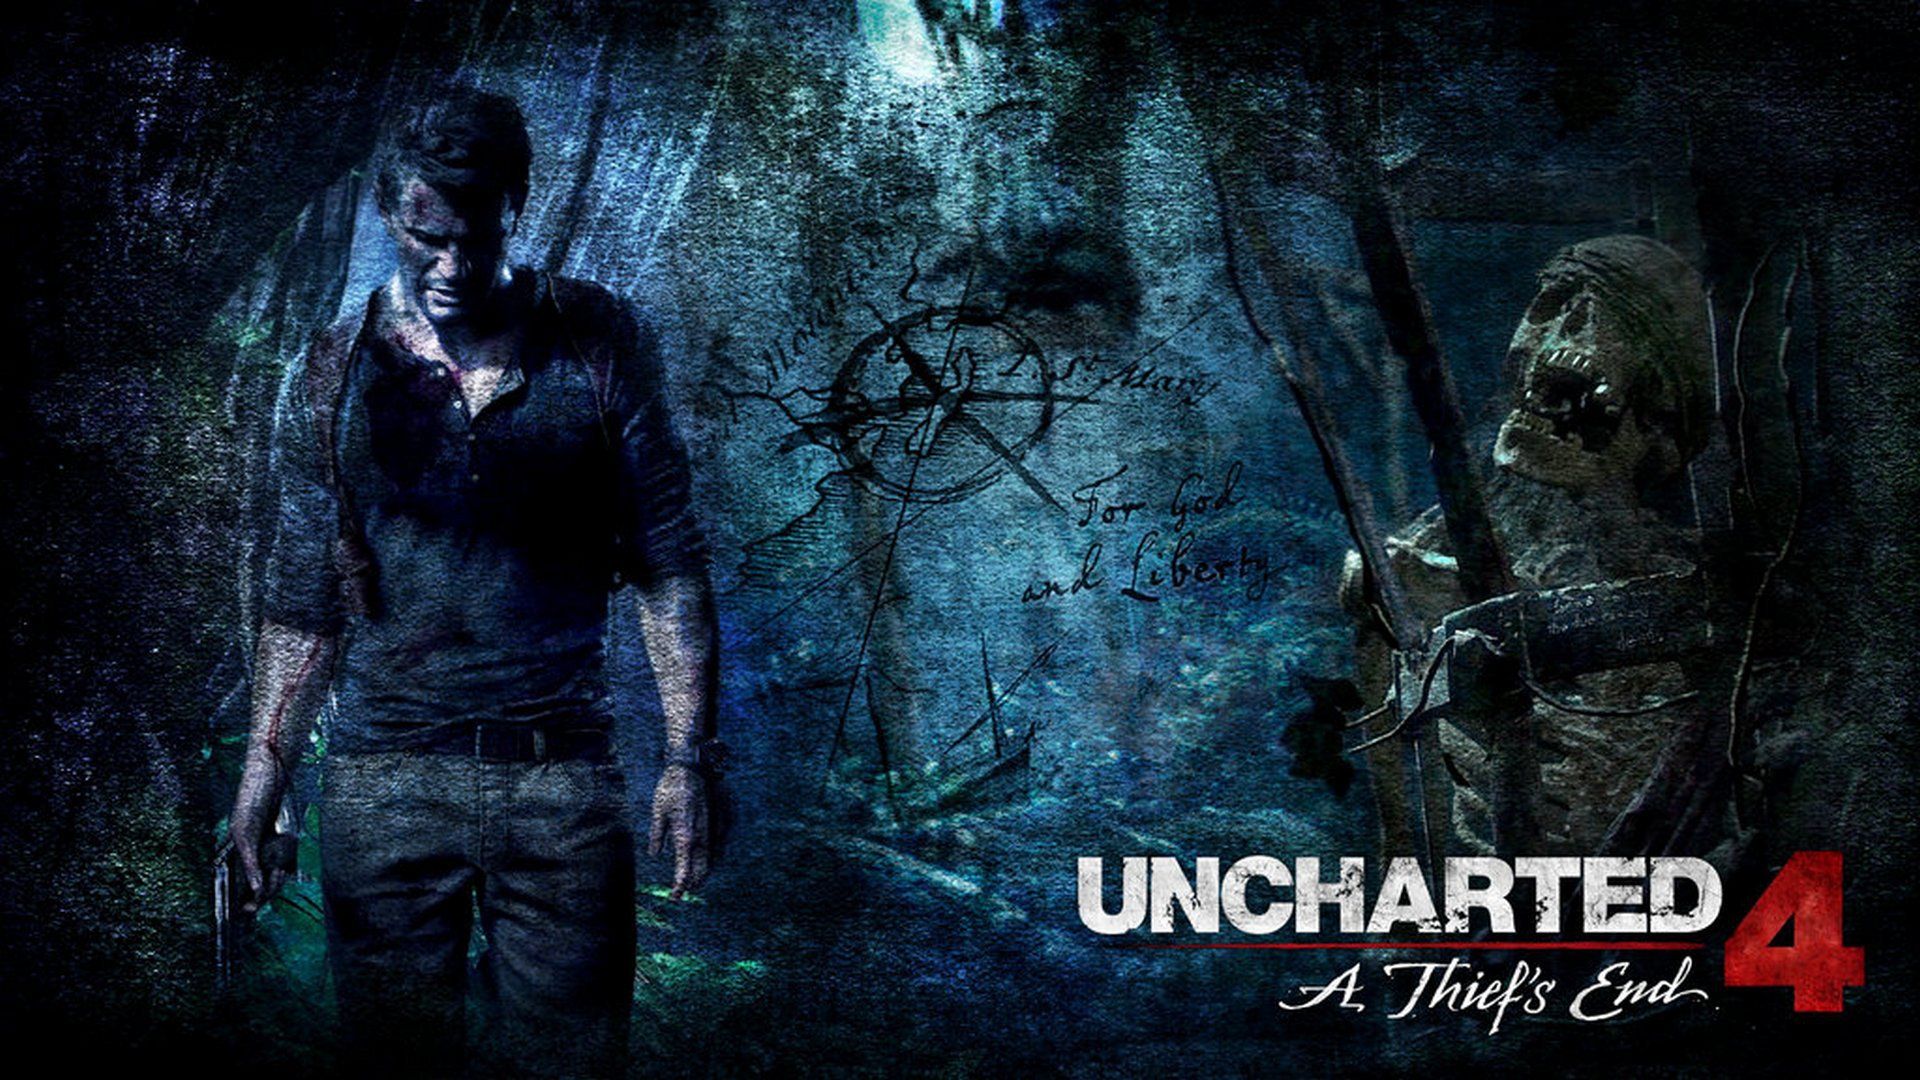 Uncharted 4: A Thief's End Wallpaper Image Photo Picture